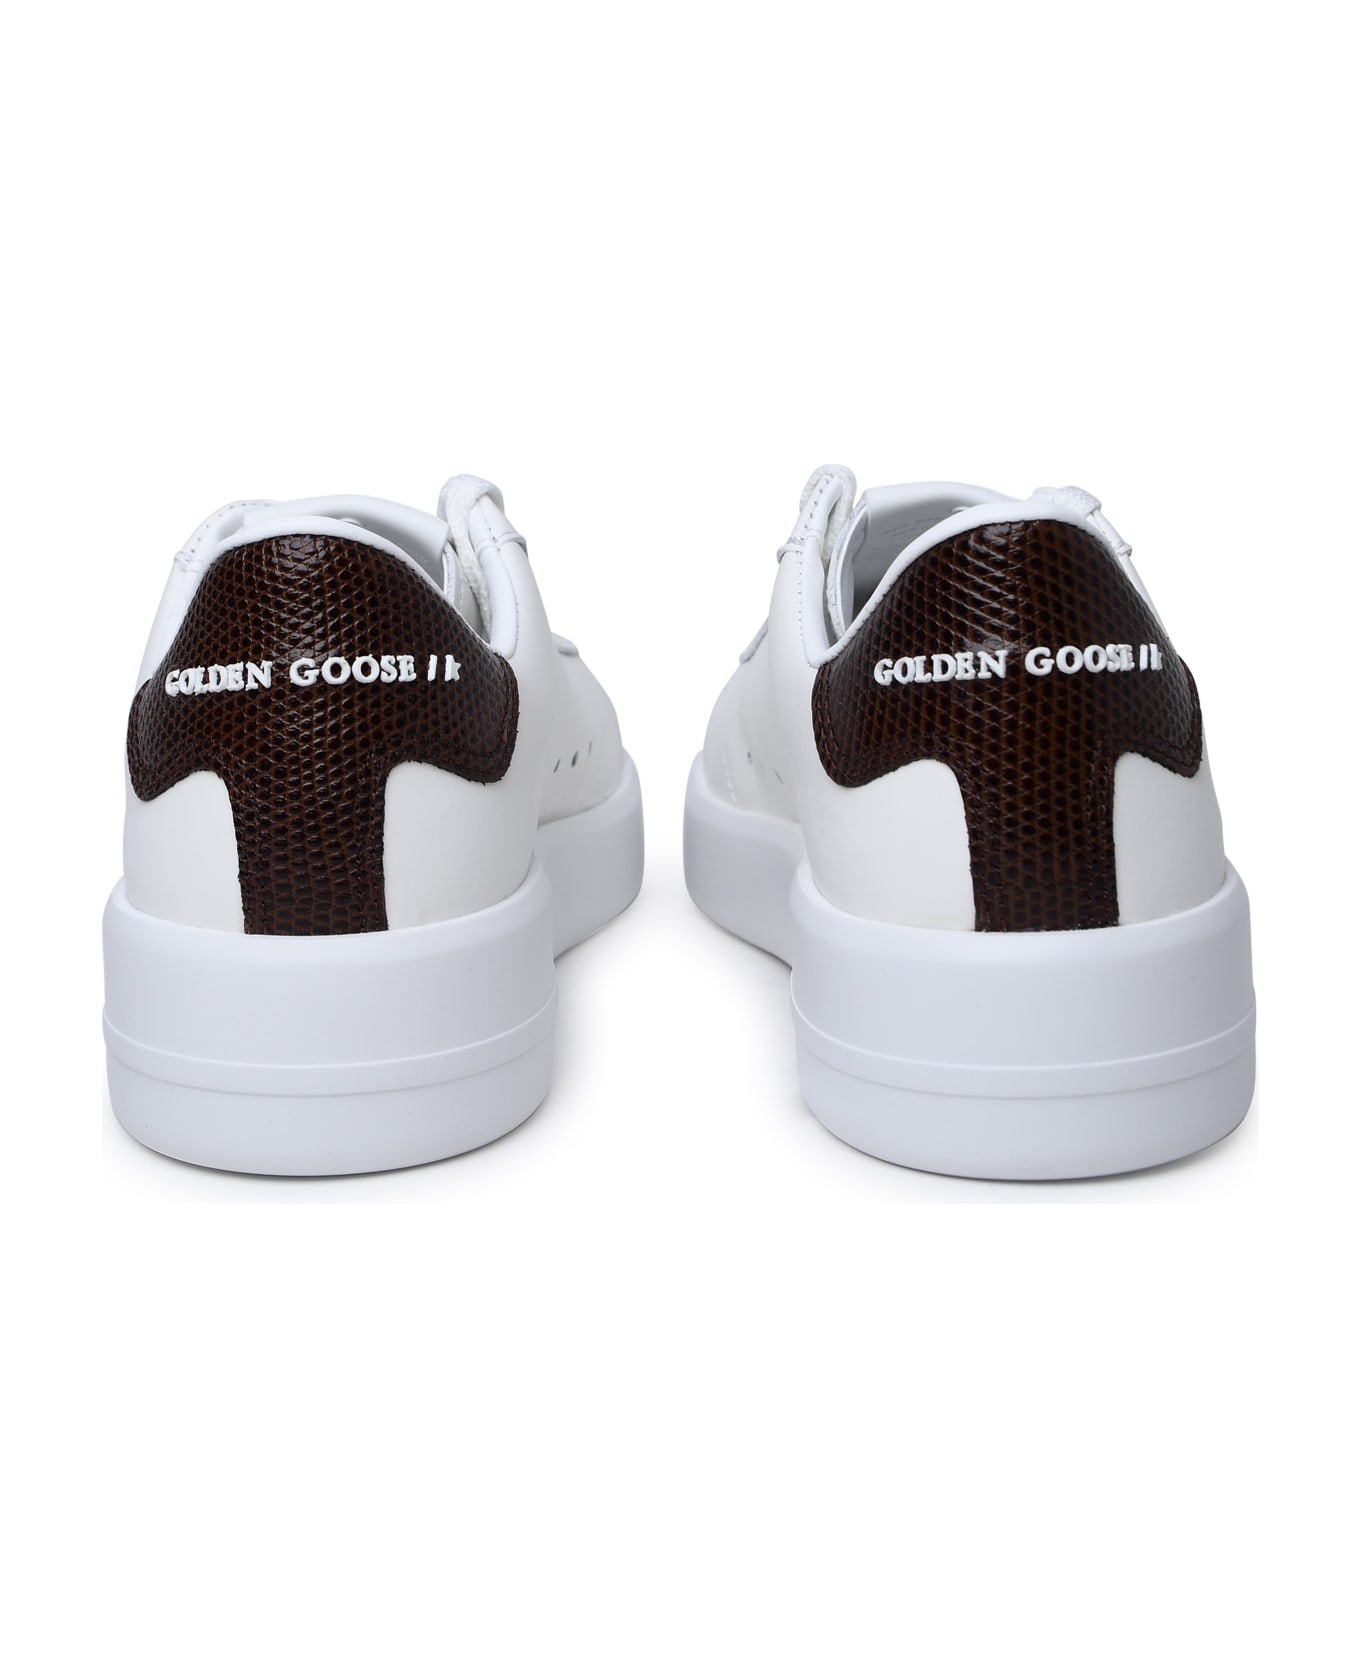 Golden Goose Pure-star Lace-up Sneakers - White-burgundy スニーカー